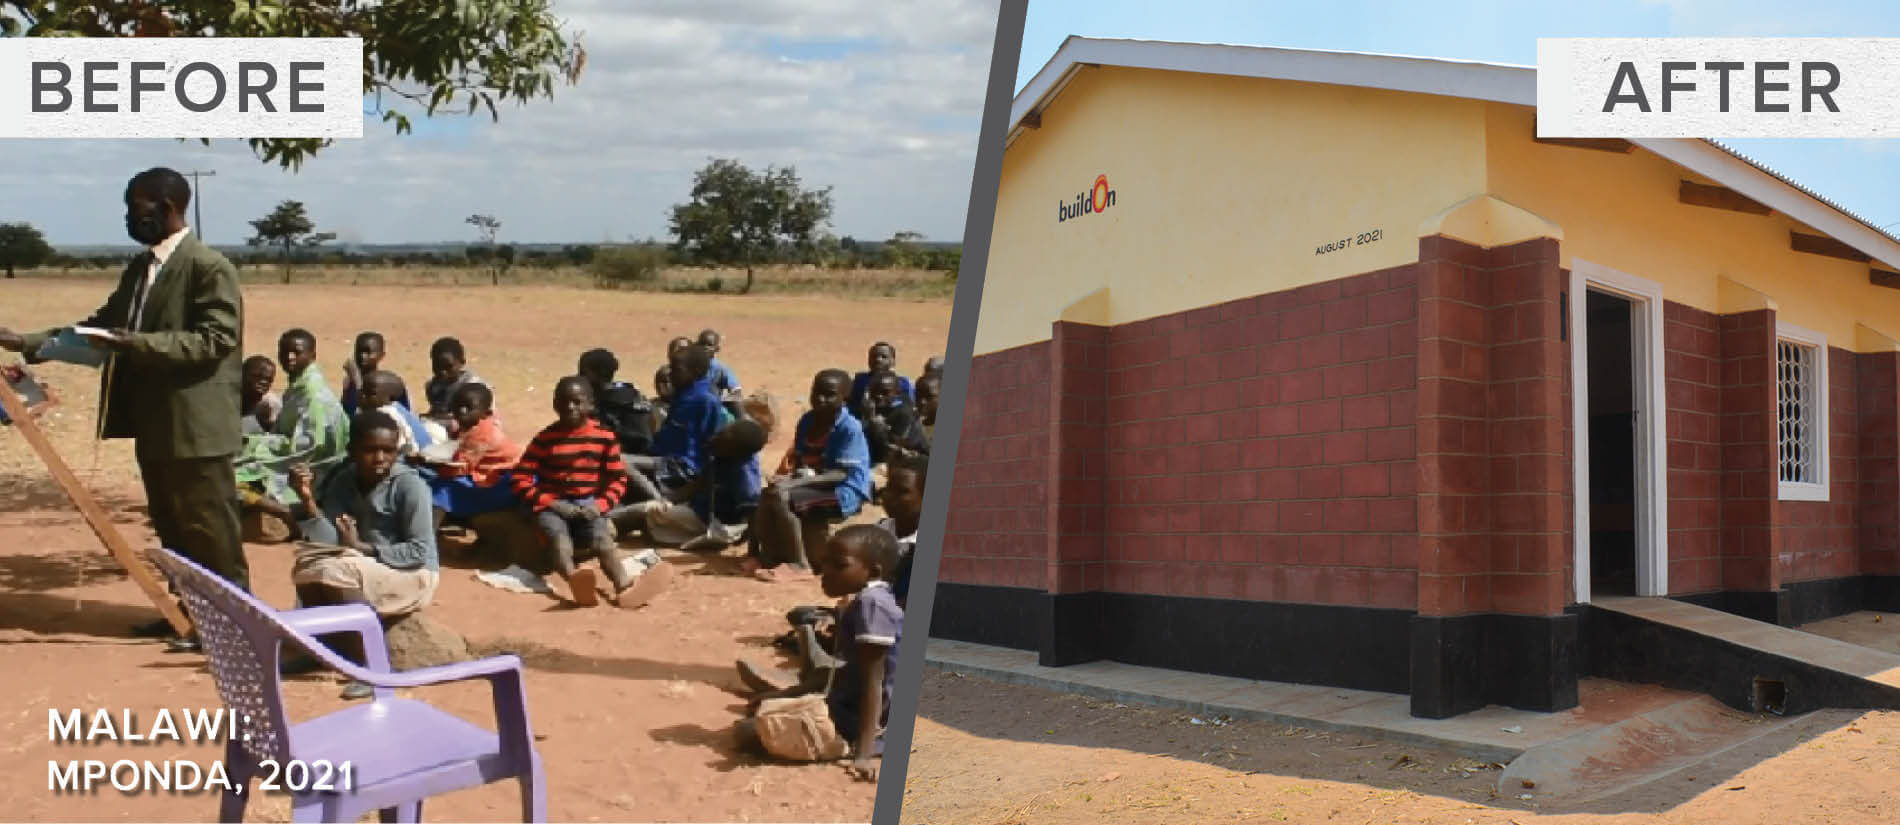 buildOn - Mponda, Malawi - Before and After_1900x825 - Dual Concept - 2021 (1)